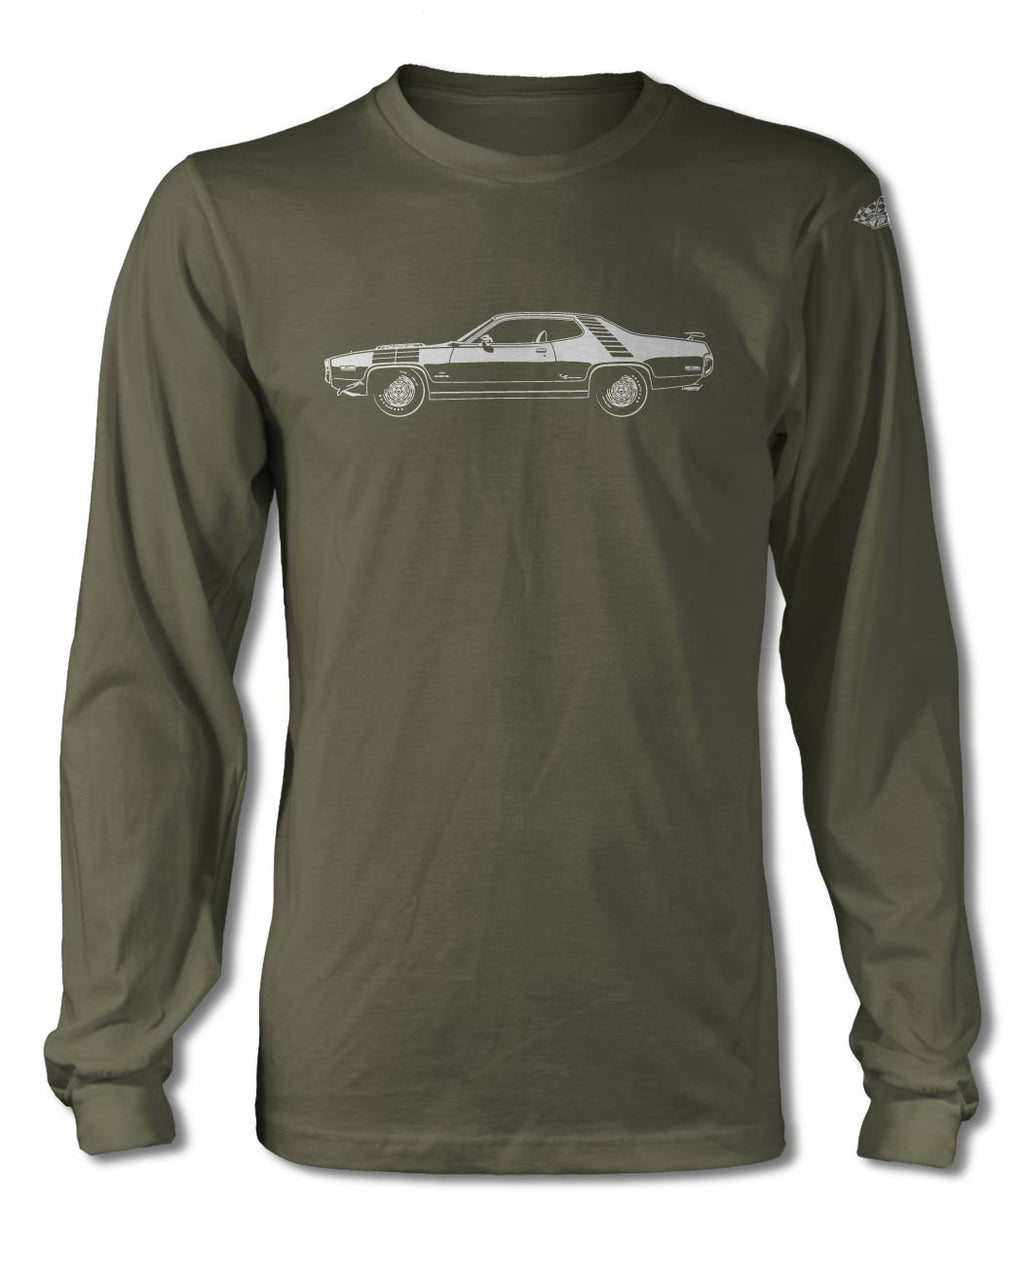 1972 Plymouth Road Runner 440 Stripes Coupe T-Shirt - Long Sleeves - Side View